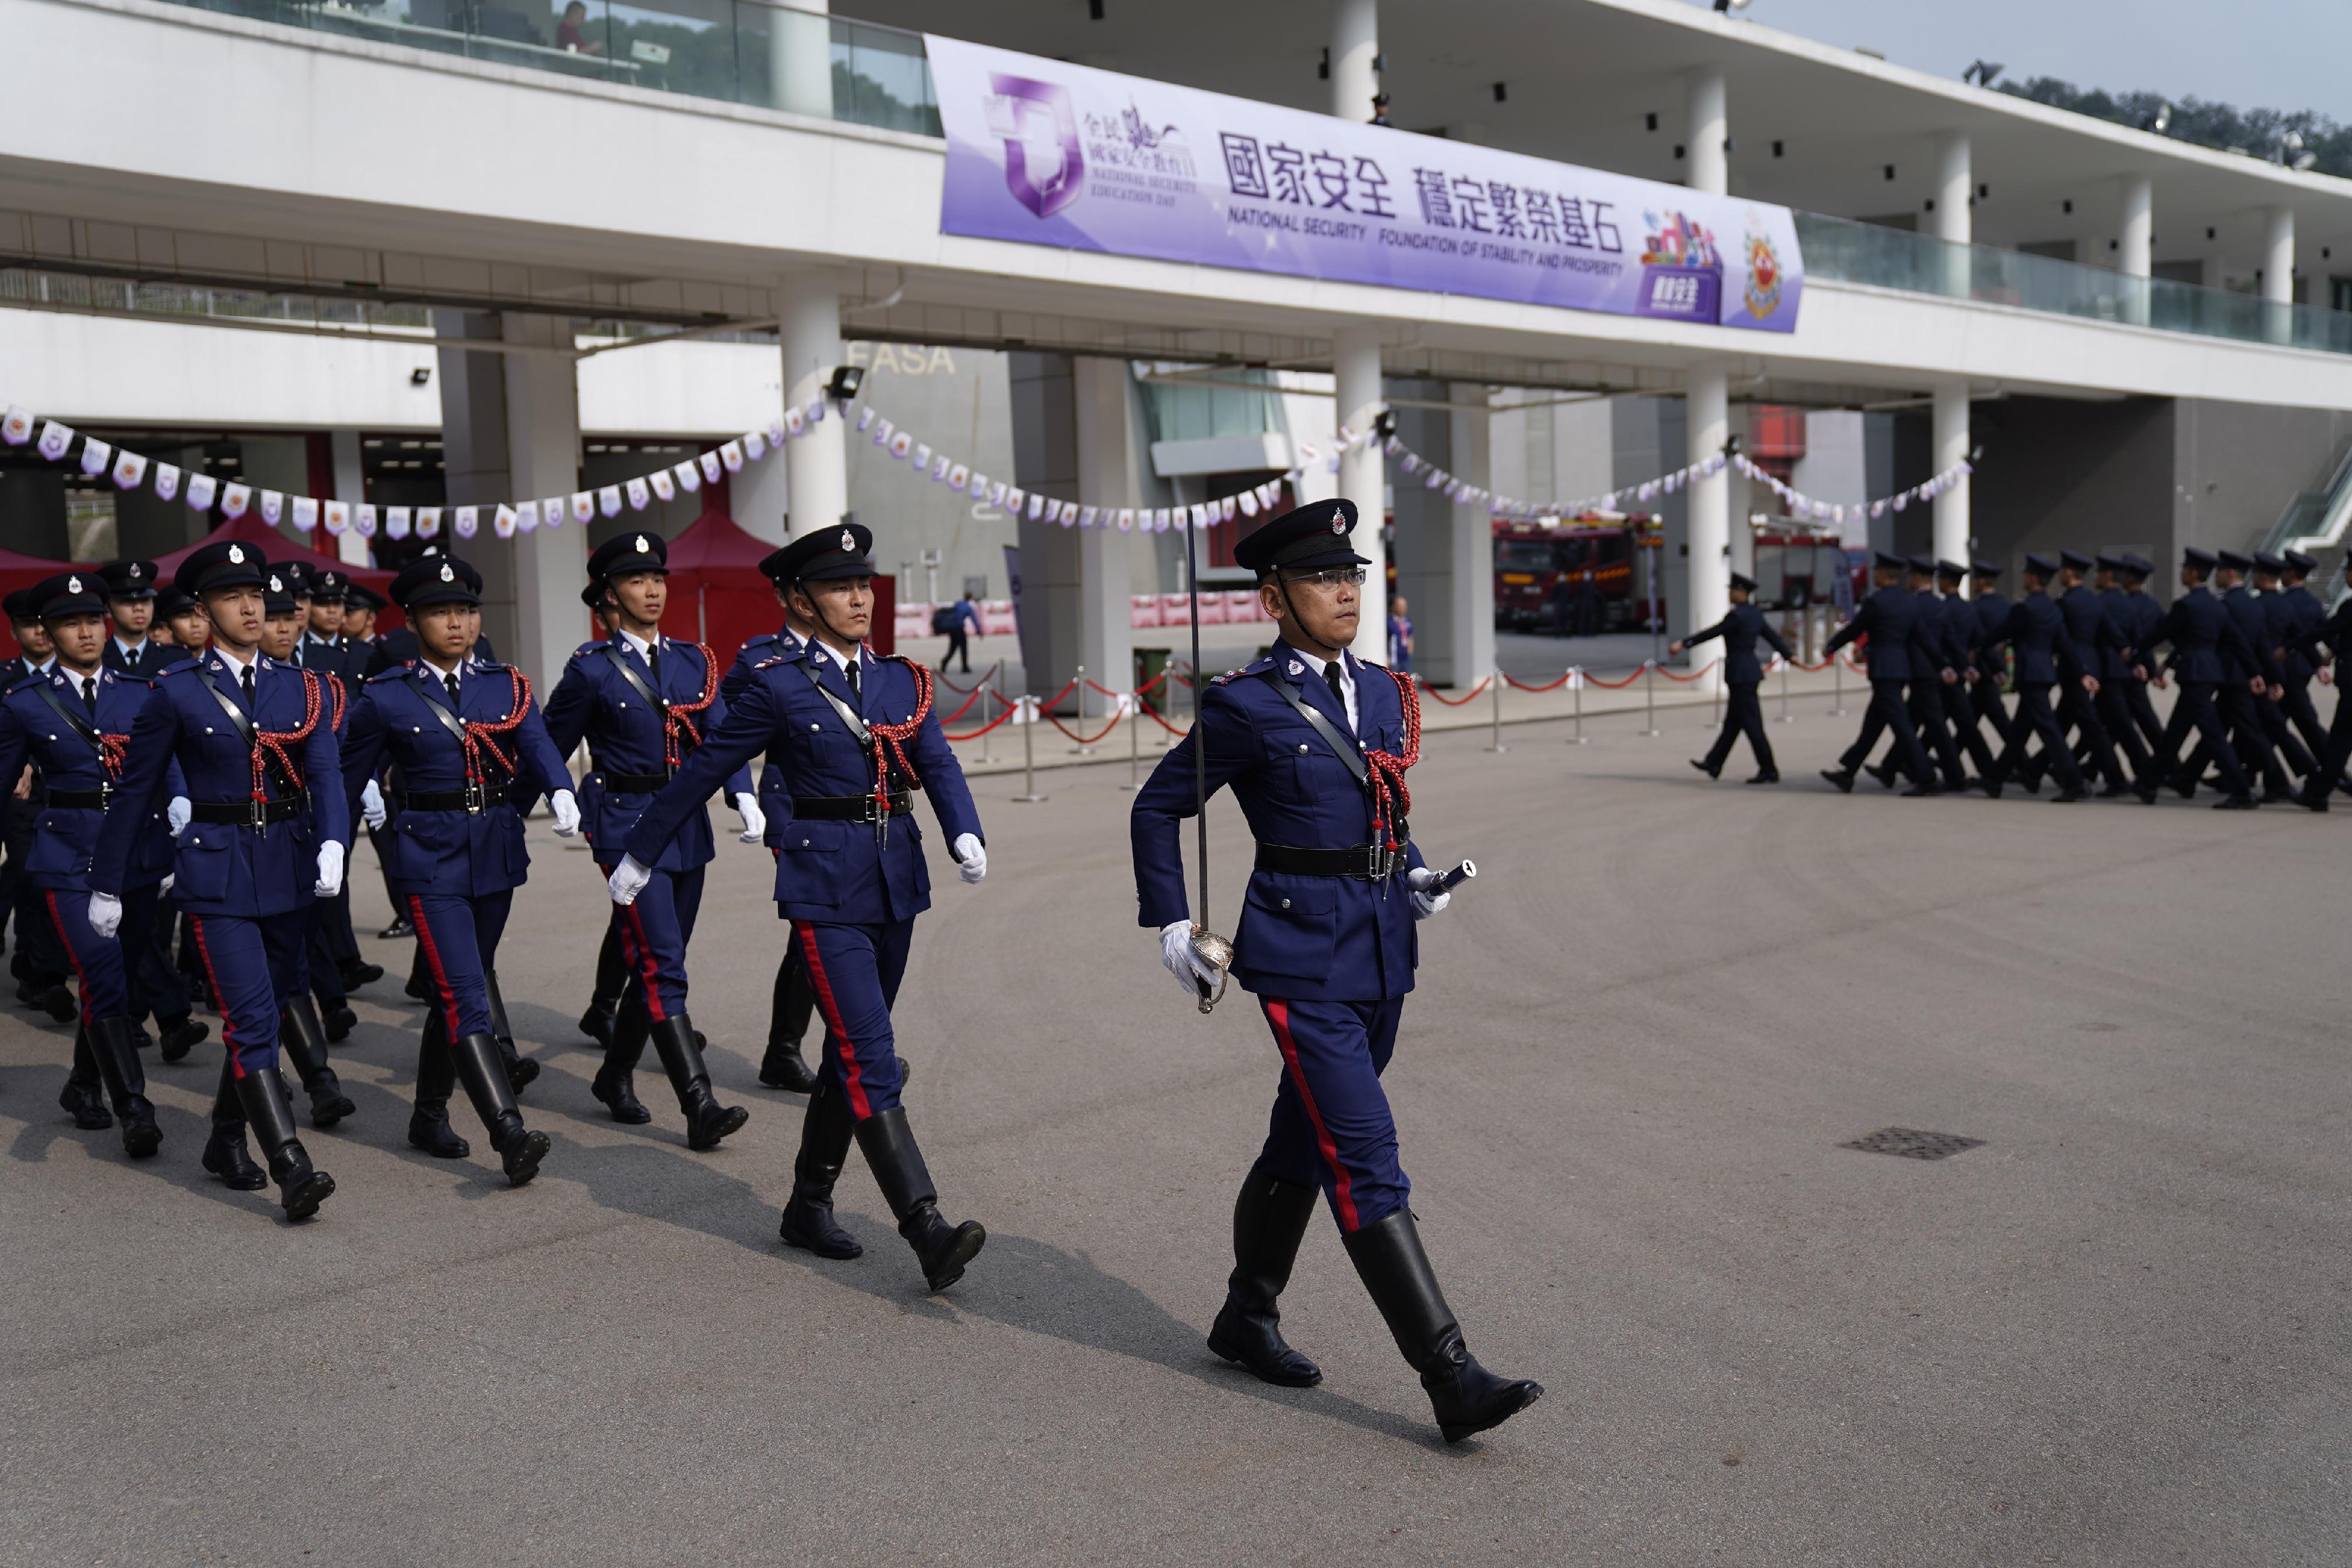 The Fire Services Department (FSD) held an open day at the Fire and Ambulance Services Academy today (April 15) to introduce training facilities in the Academy. Various demonstrations, experiences and performances were arranged for the public. Photo shows the FSD's Guard of Honour performing the Chinese-style foot drill.